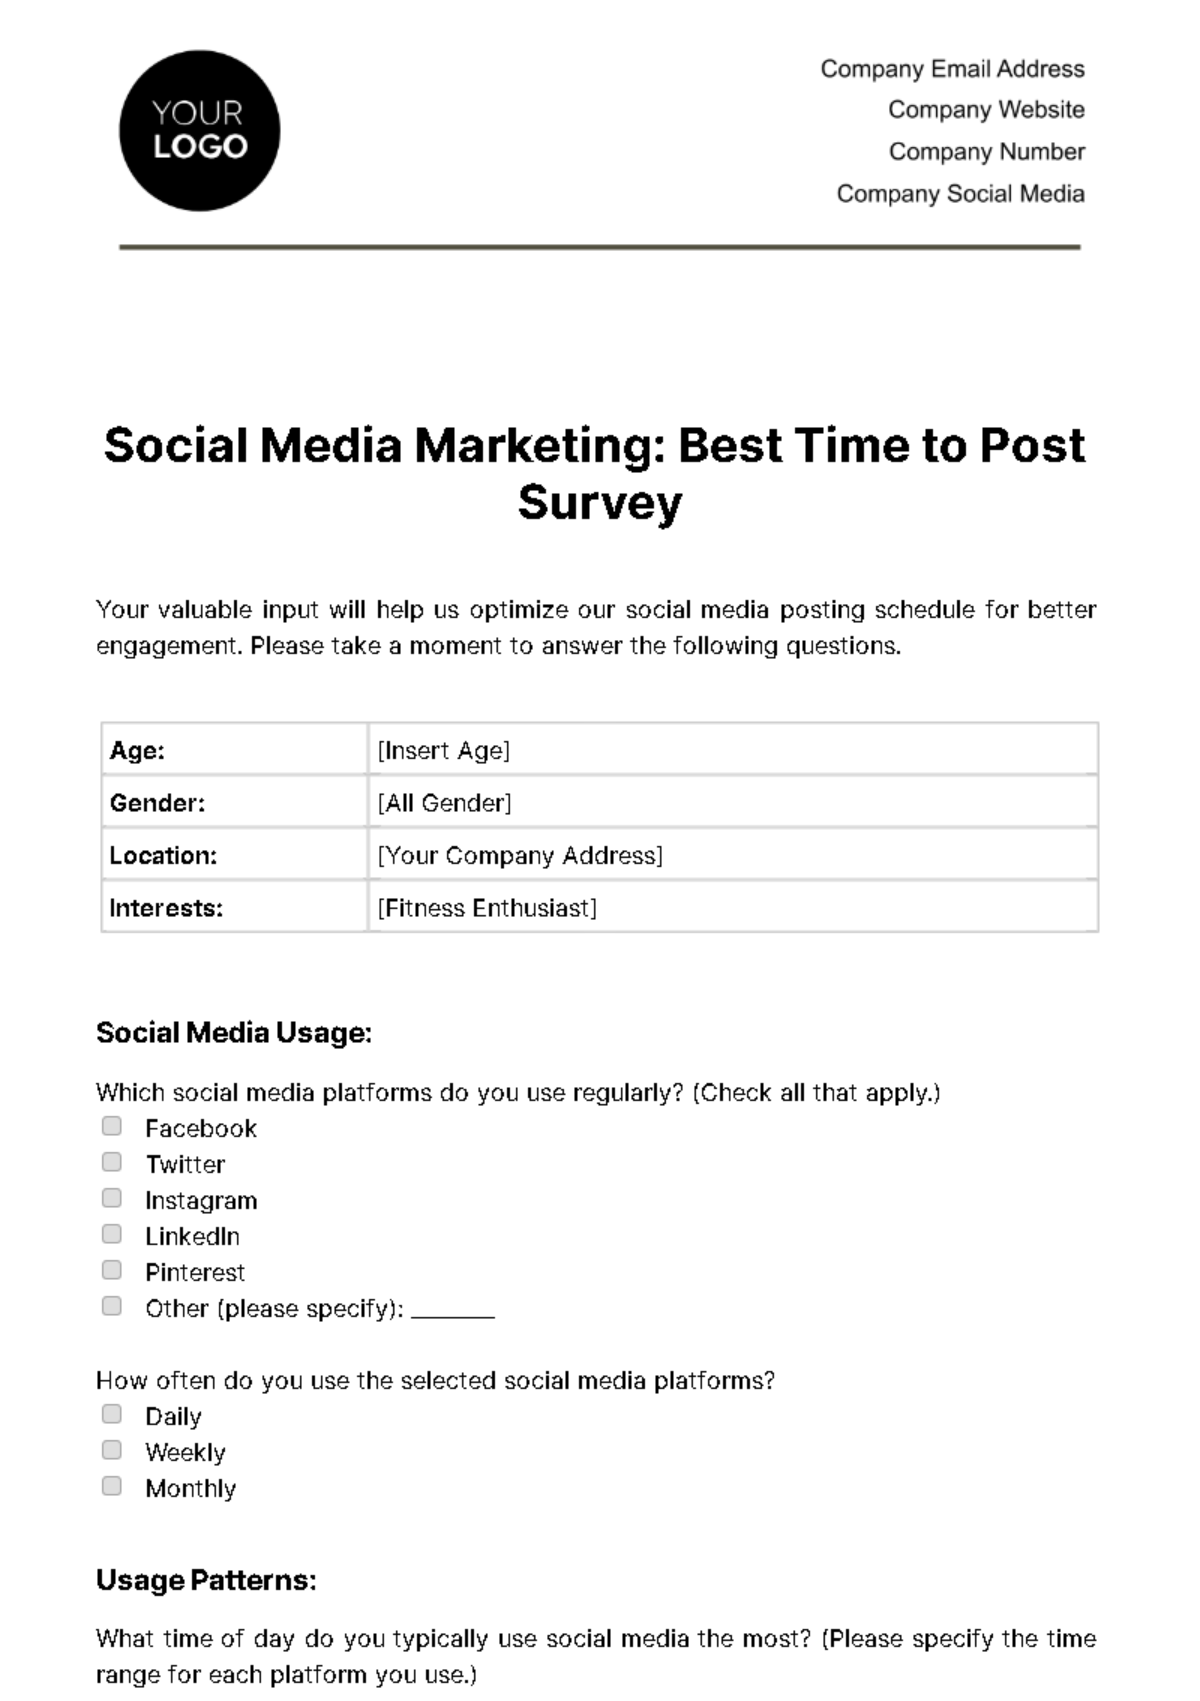 Free Social Media Marketing Best Time to Post Survey Template